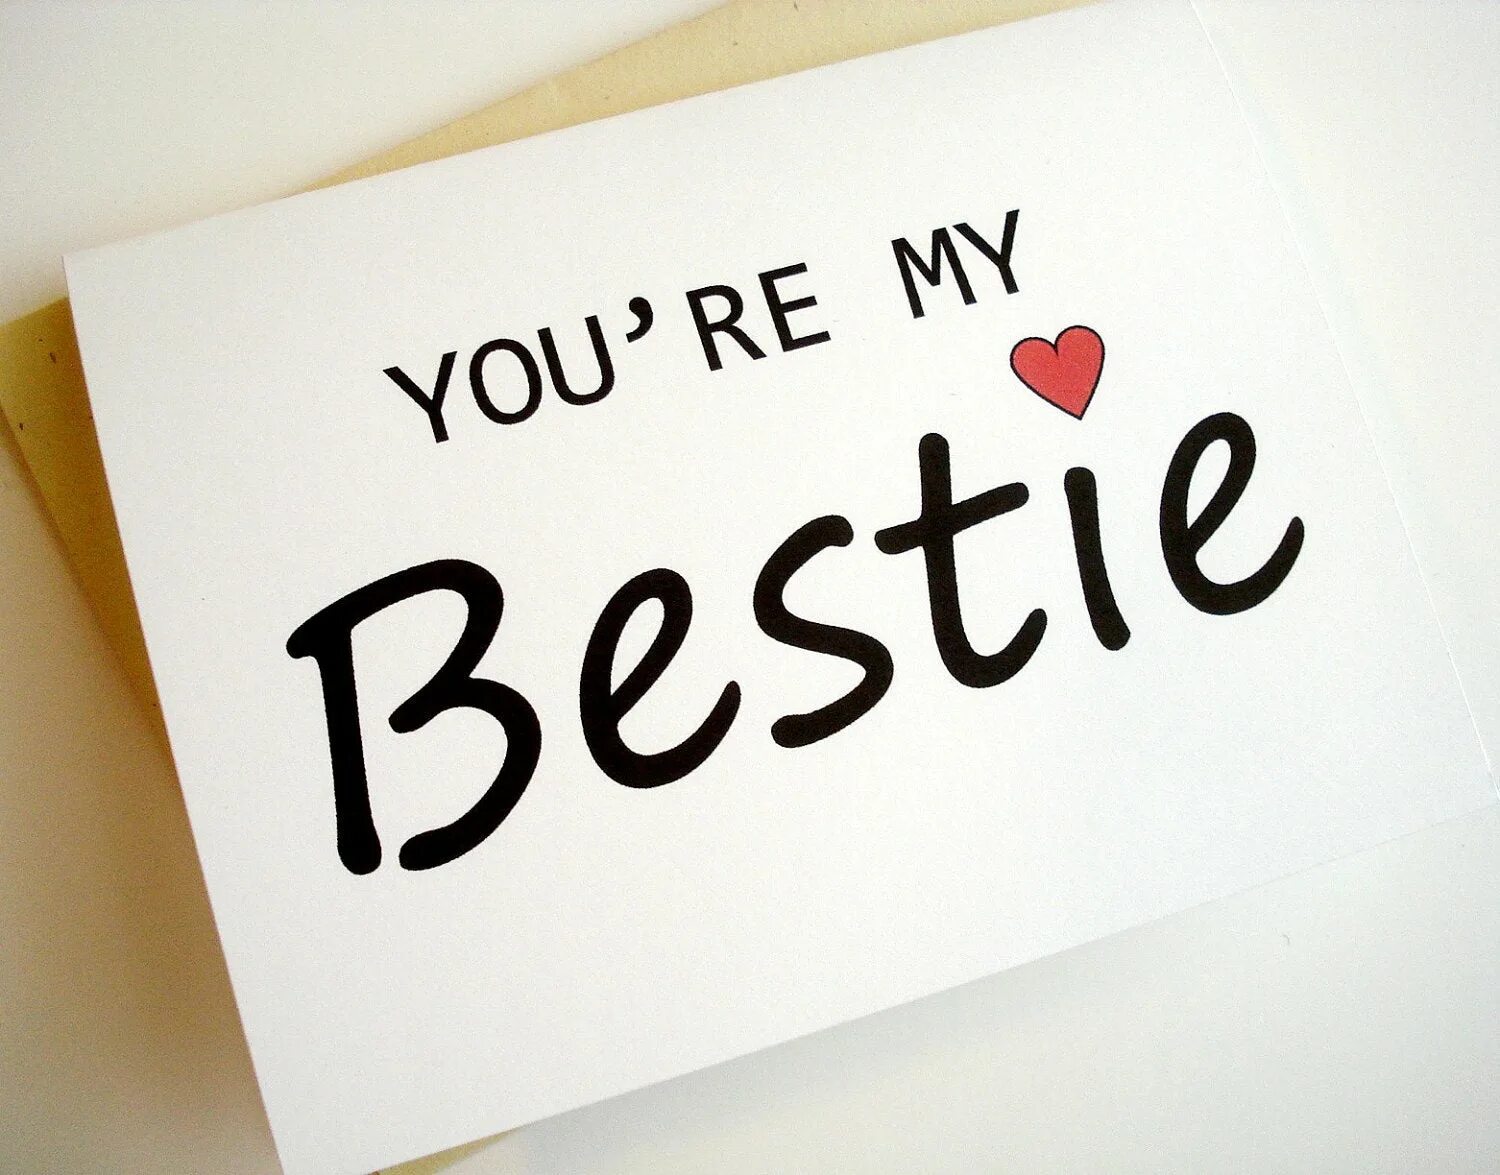 She s easy. You are the best надпись. Моя bestie. You're my best friend! Картина. Открытки my best friends.